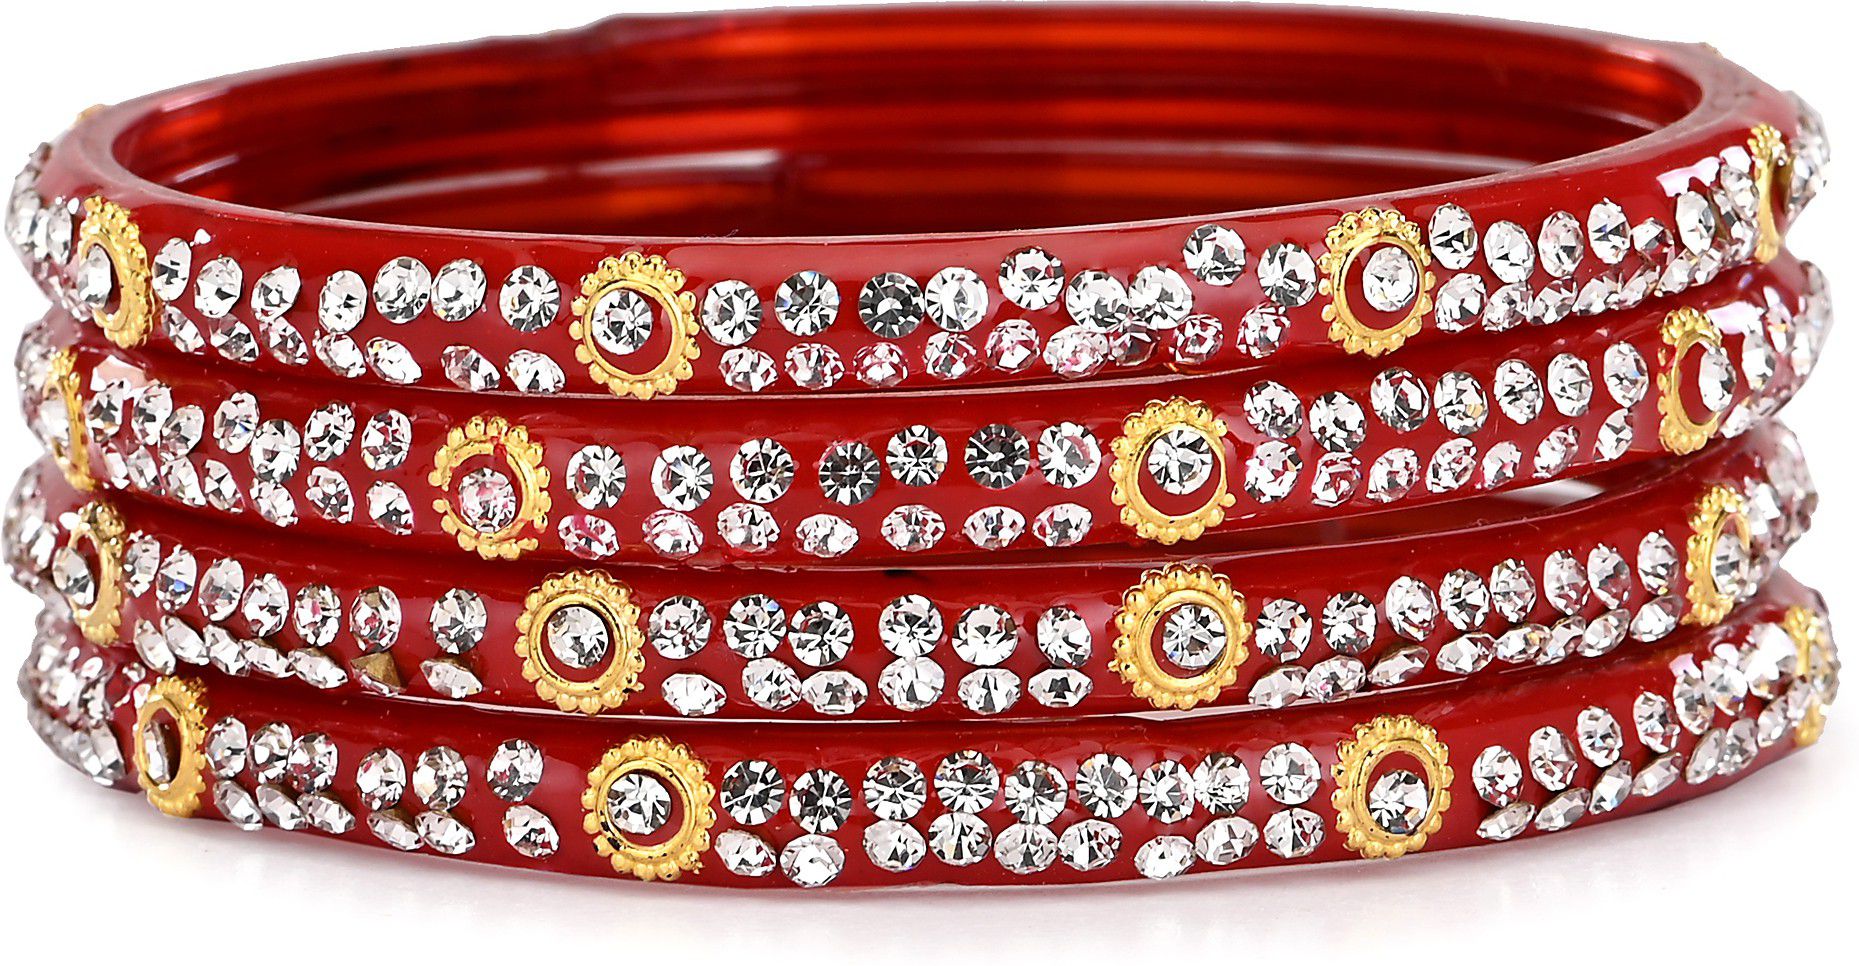     			Somil Designer Bridal Glass Bangle Set For Party Marriage, And Function, Ornamented, Colorful -S11_2.2